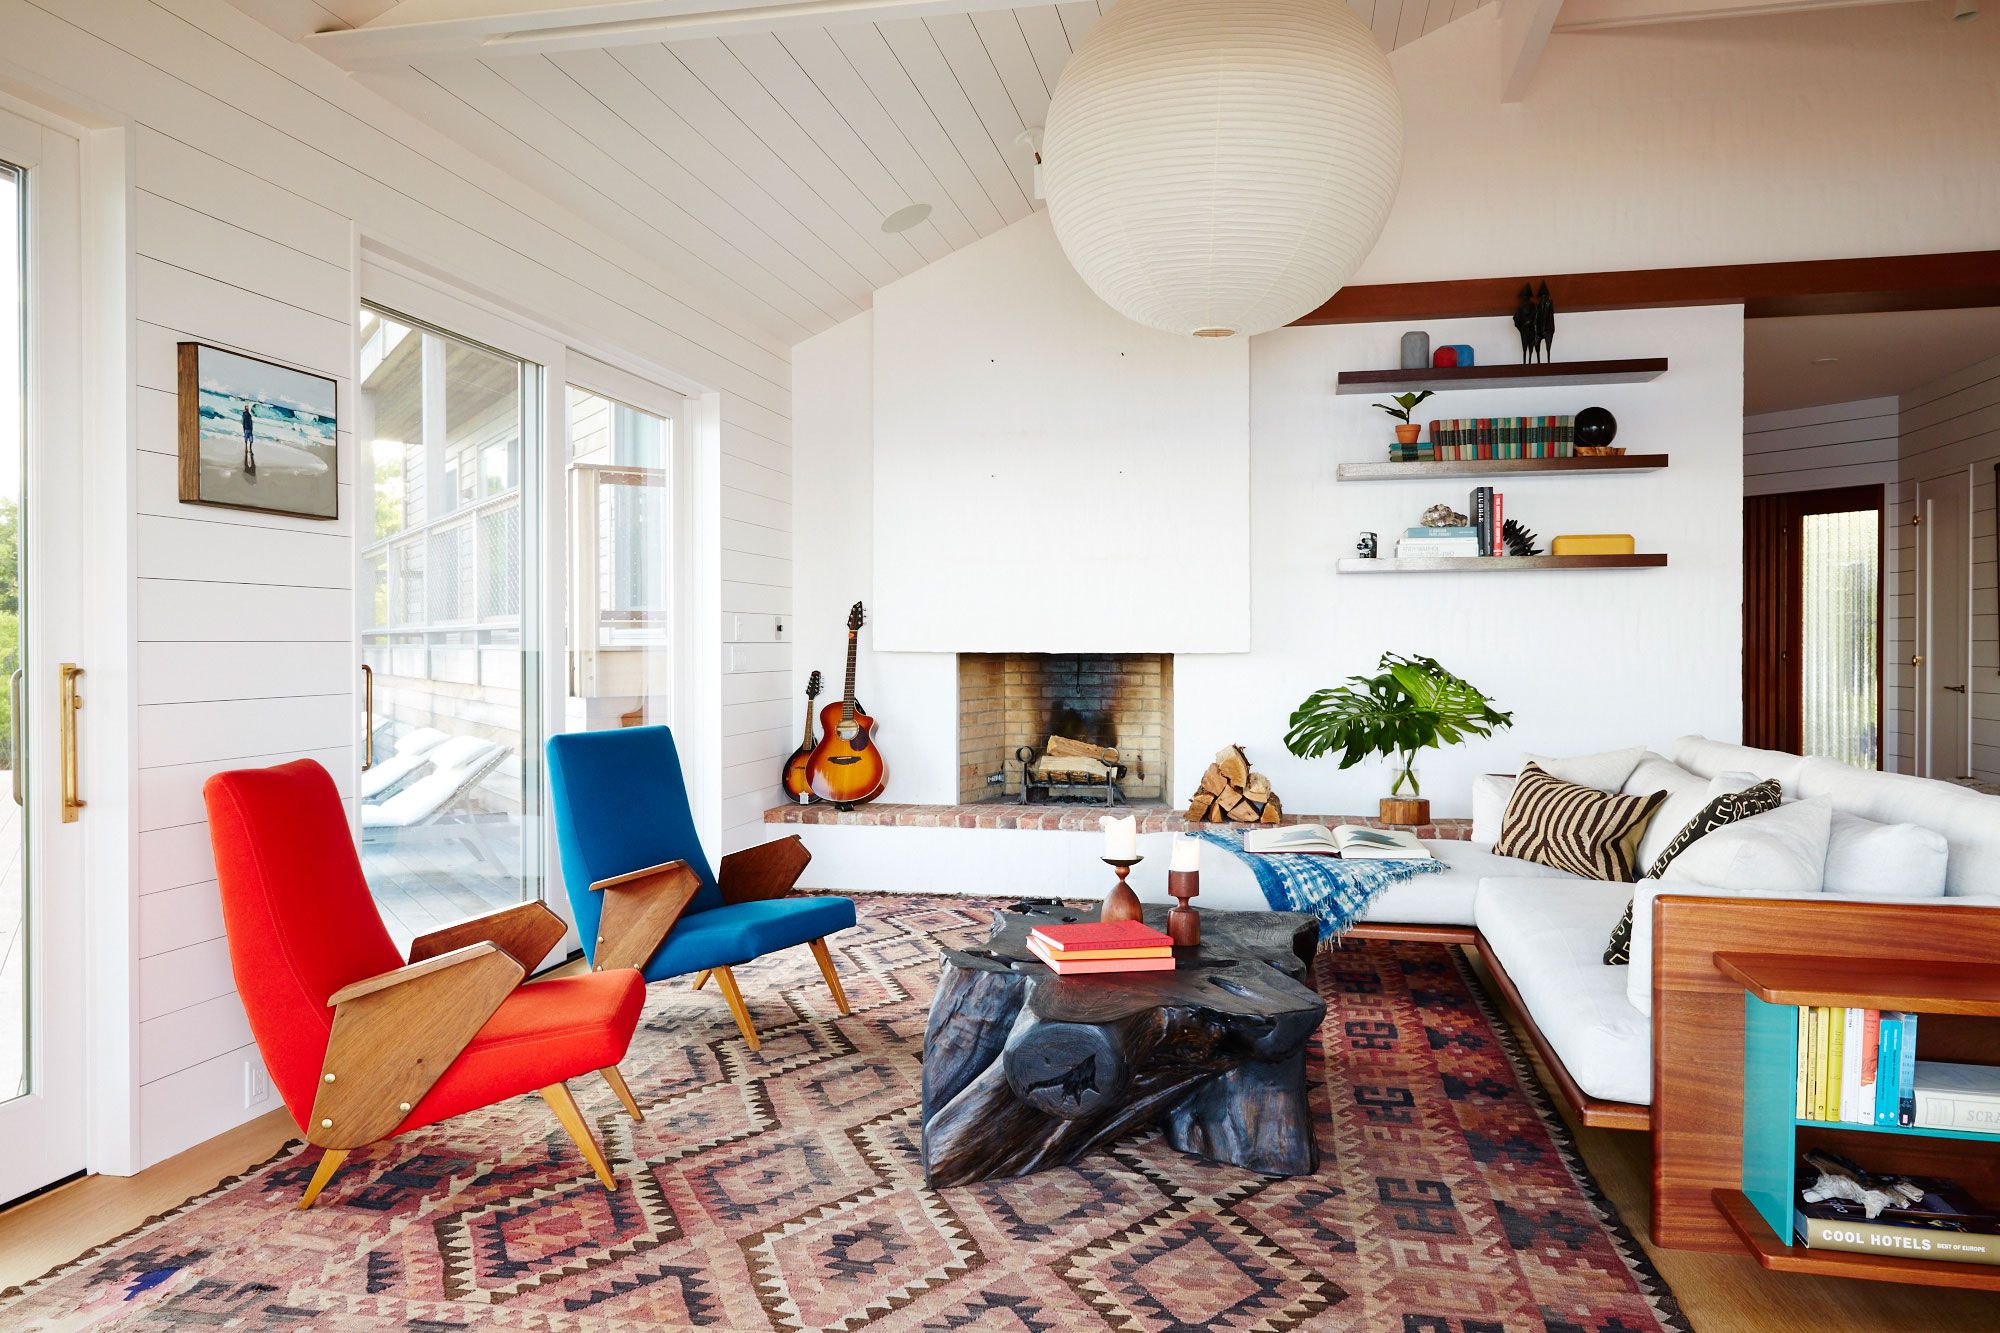 31 Family Room Ideas That Strike The Balance Between Cozy And Elevated